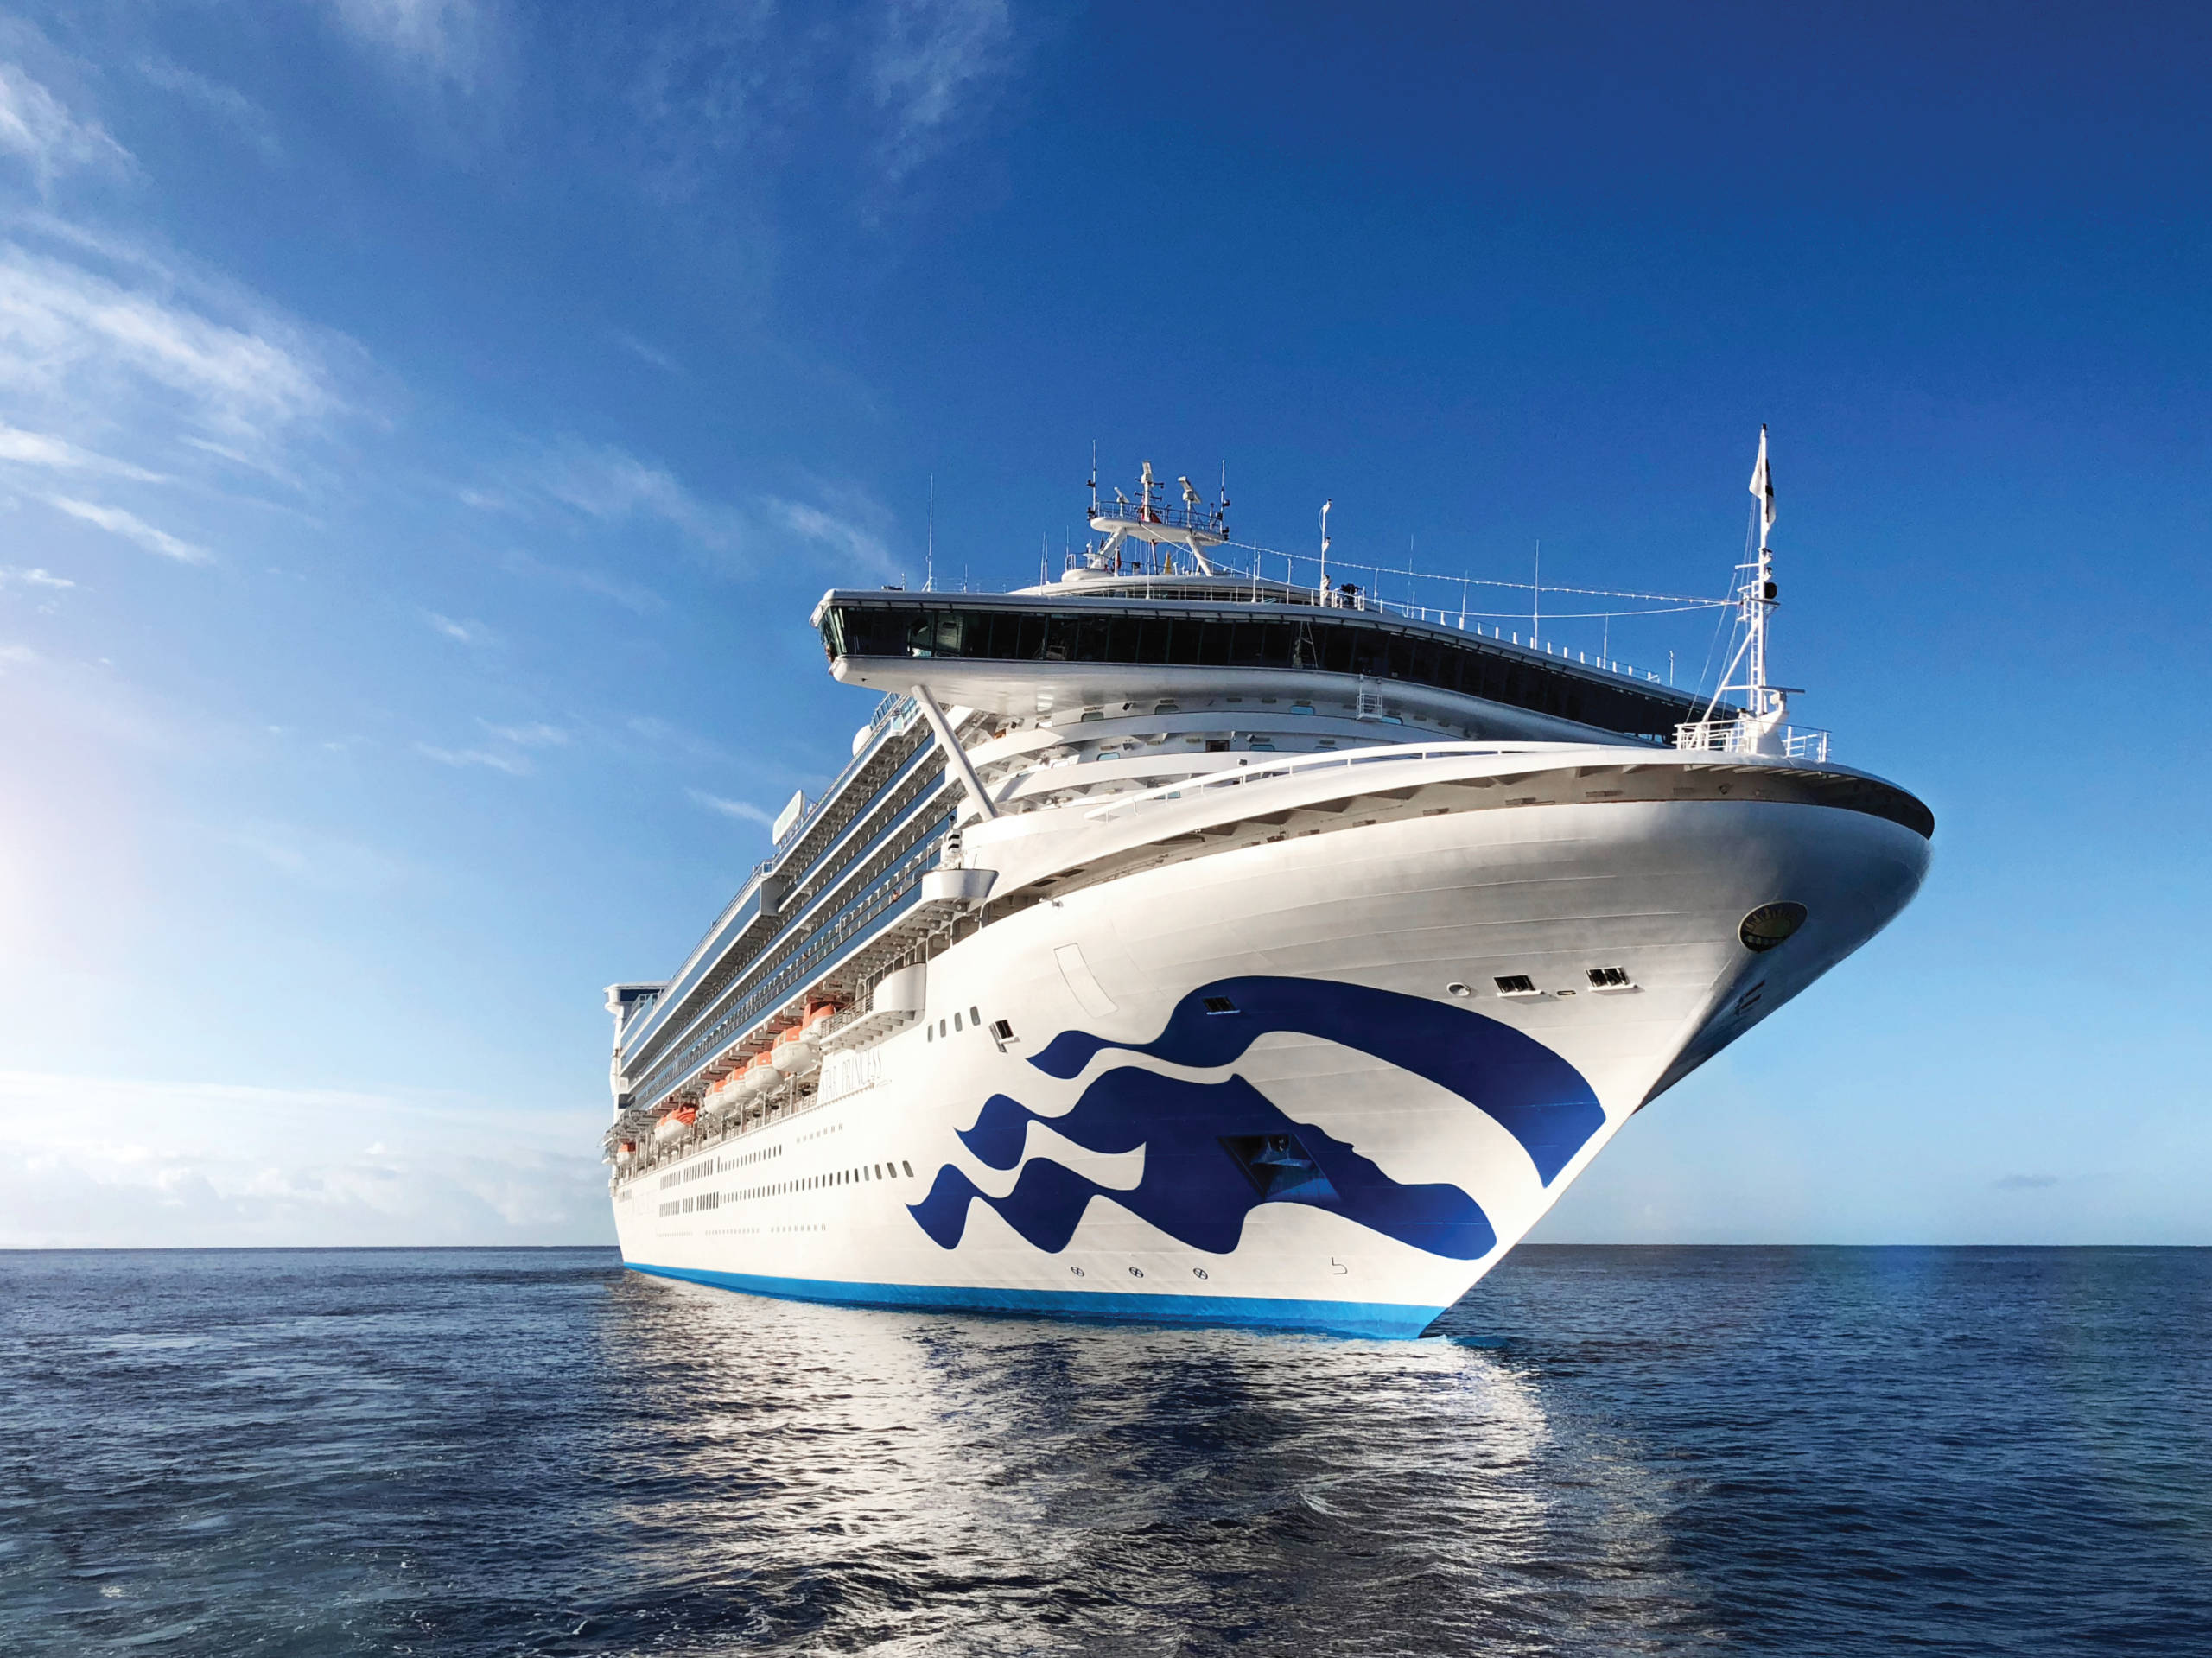 The ultimate guide to Princess Cruises ships and itineraries